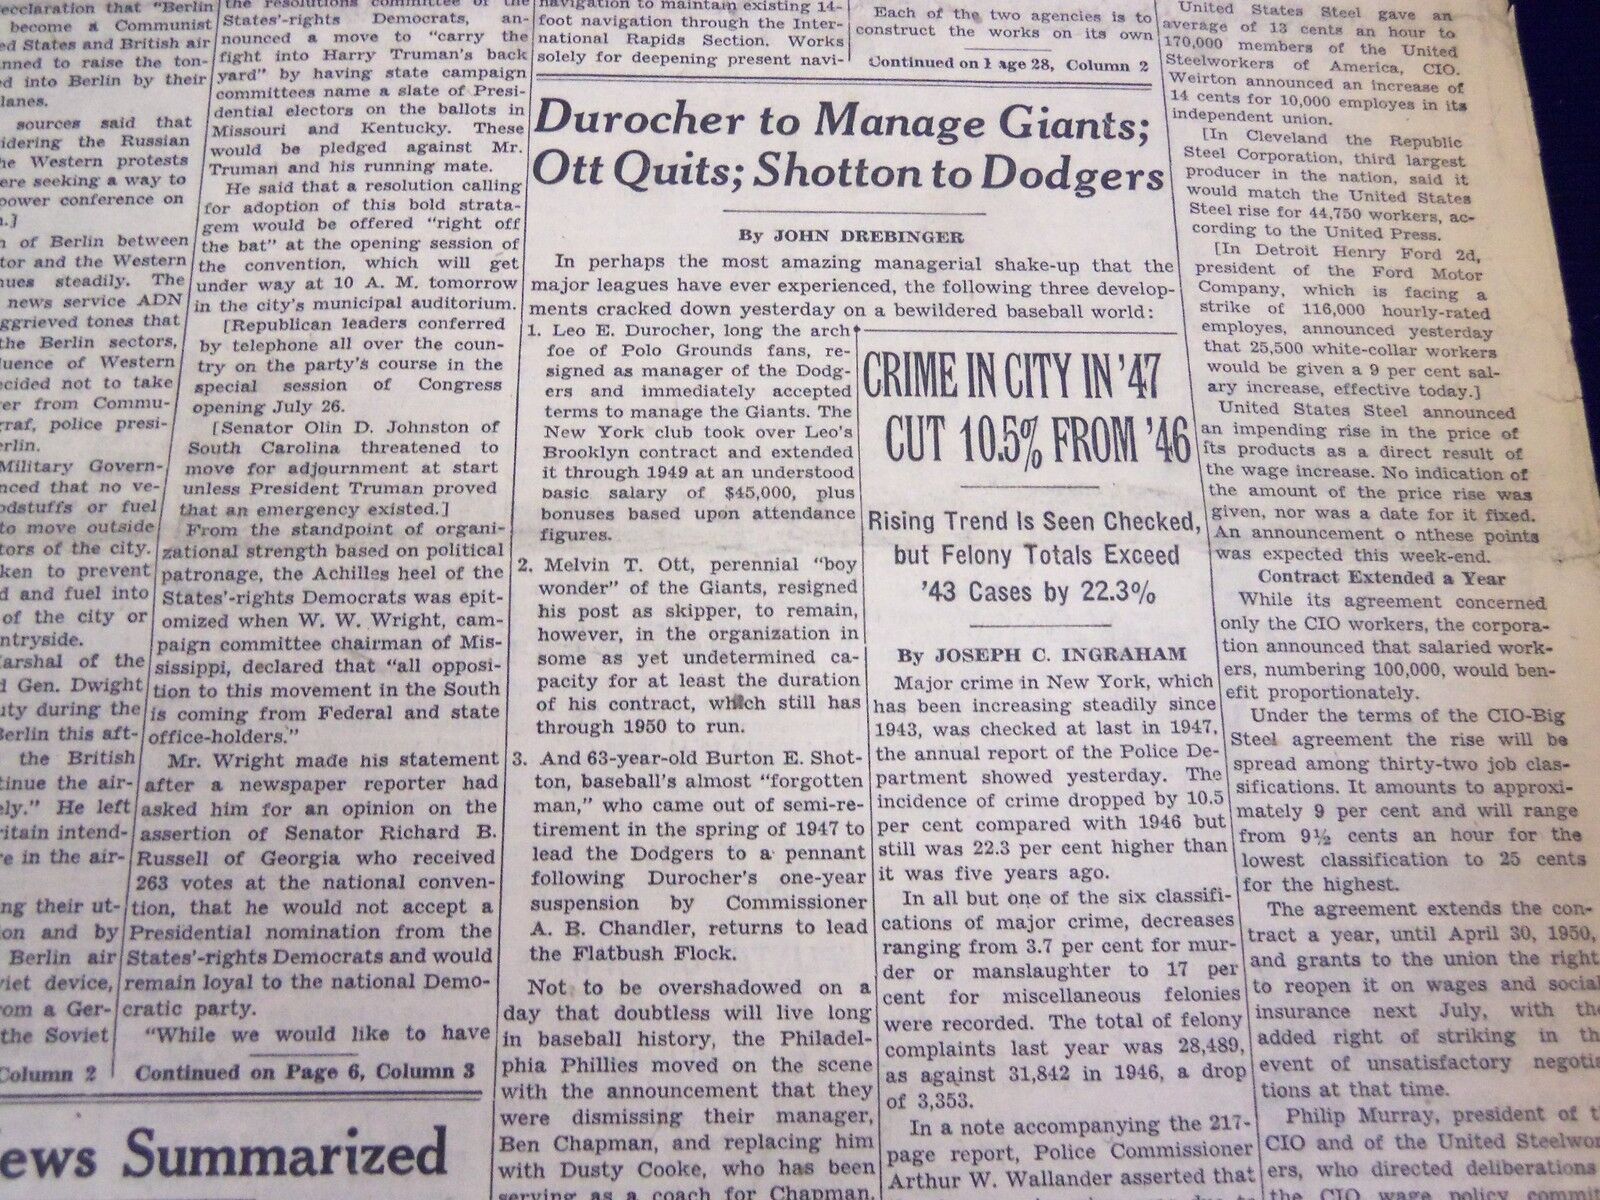 1948 JULY 17 NEW YORK TIMES - DUROCHER TO MANAGE GIANTS OTT QUITS - NT 3767